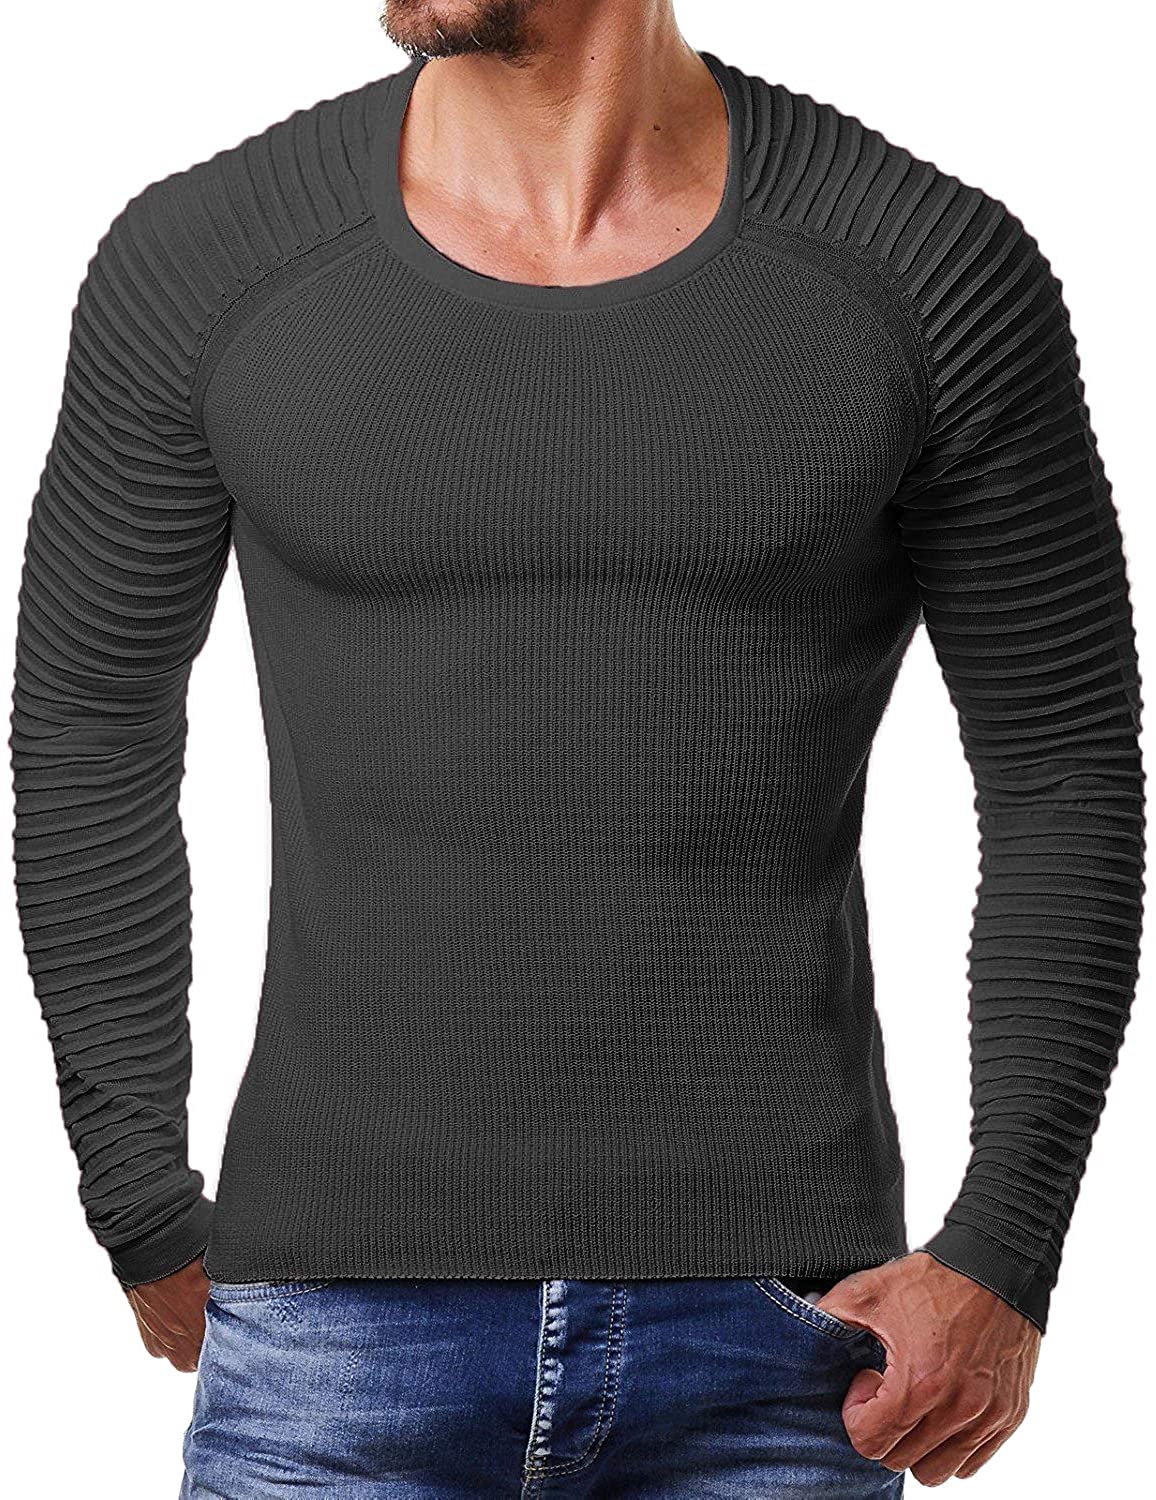 Coofandy Mens Cable Knit Jumper Sweater Long Sleeve Crew Neck Pullover Top 